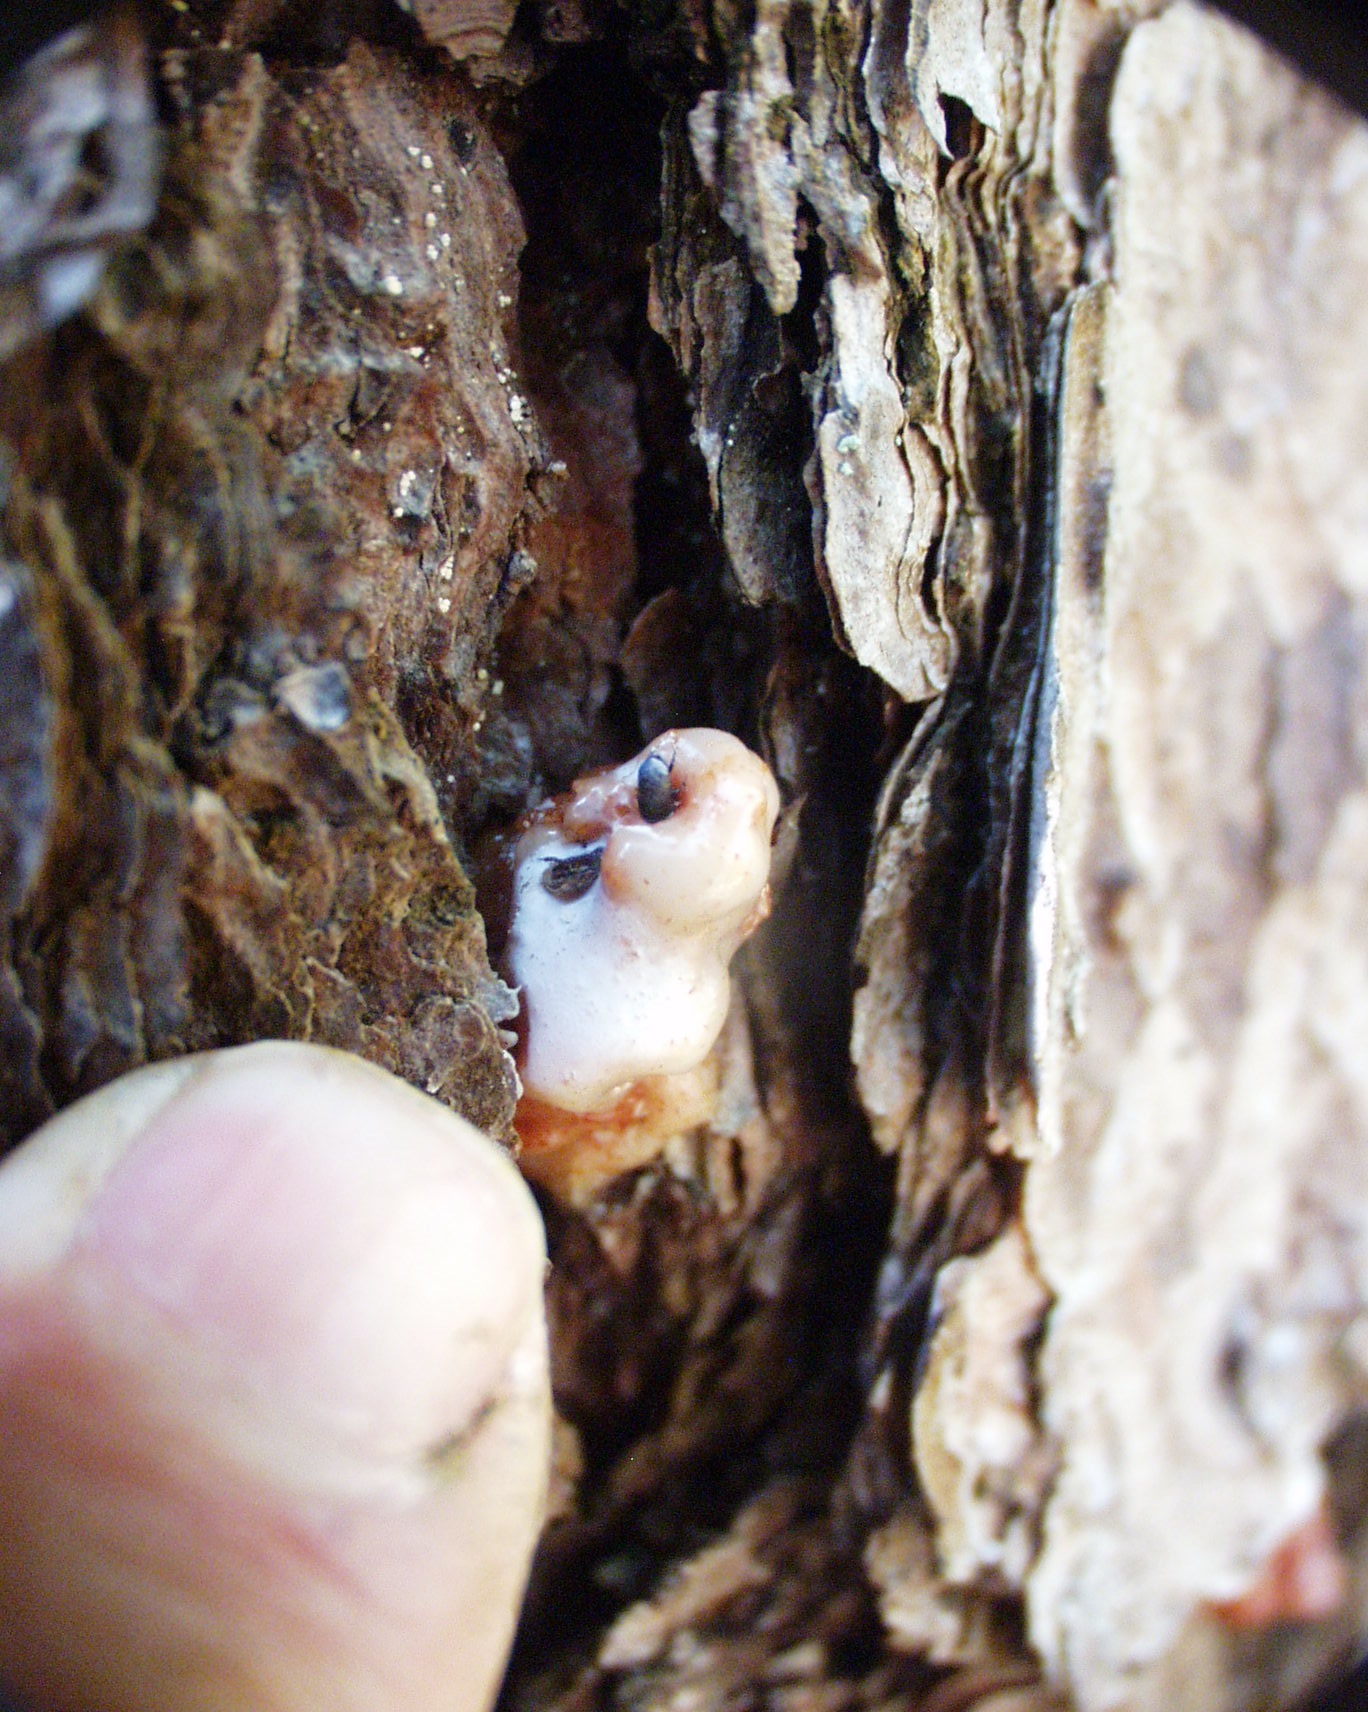 Southern pine beetle larvae found in pitch pine bark.   VICTORIA BUSTAMANTE